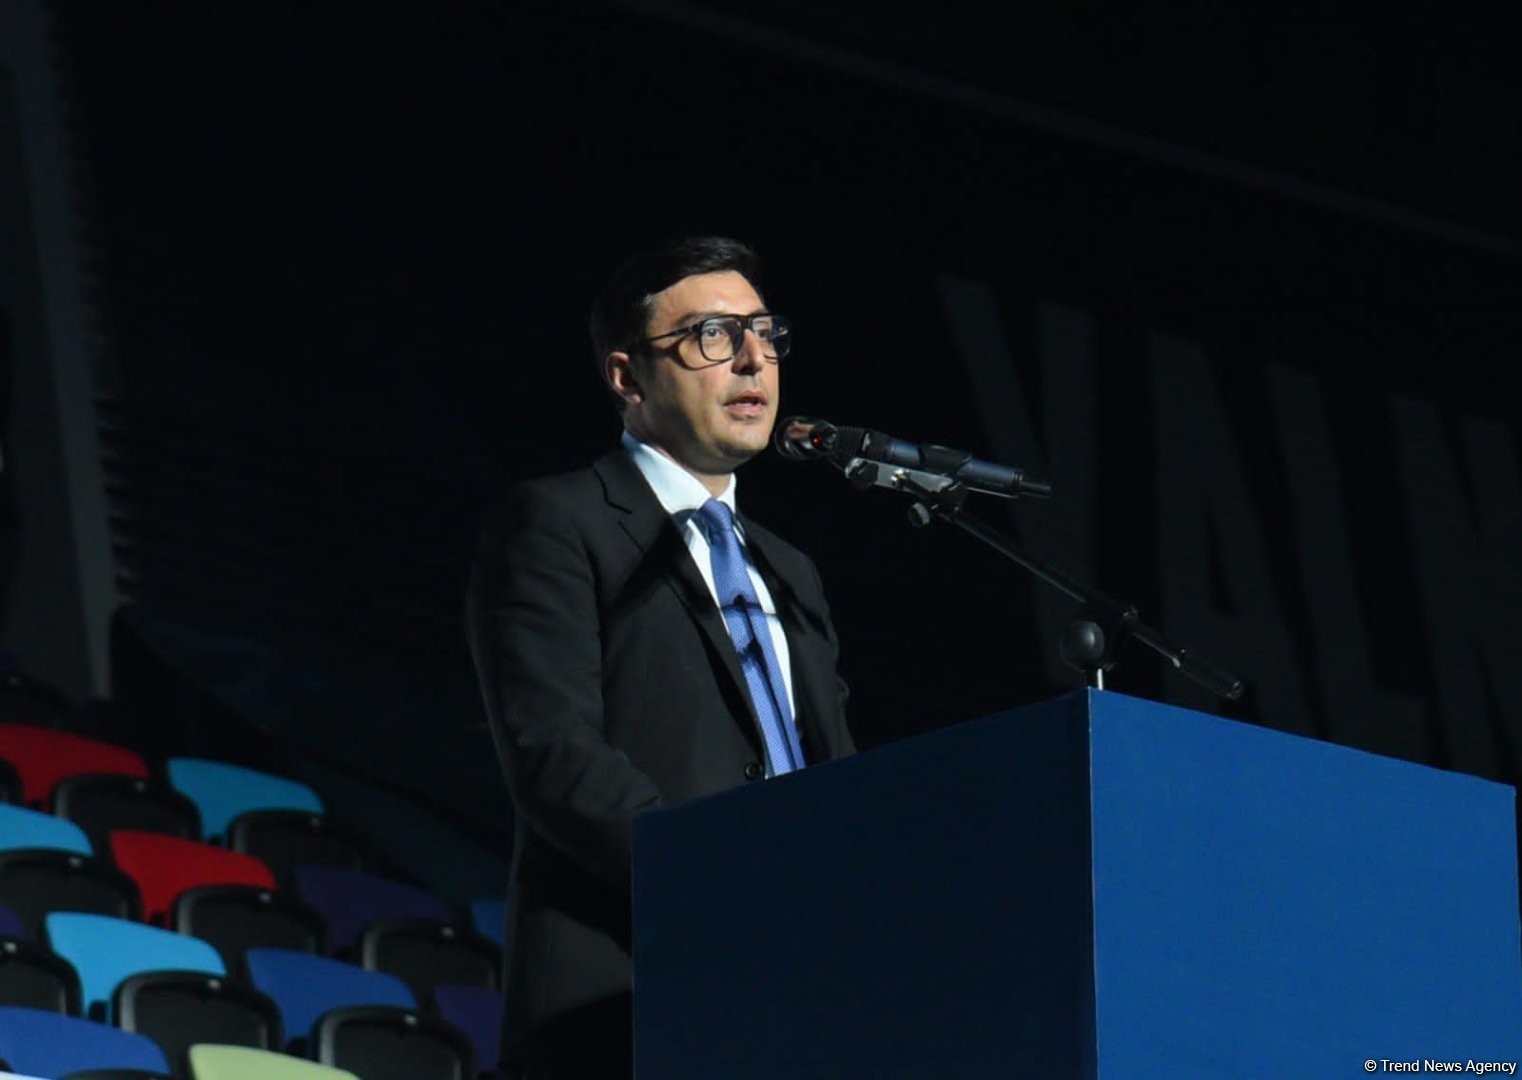 Azerbaijan's Baku attracts more countries for World Cup events each year, says minister